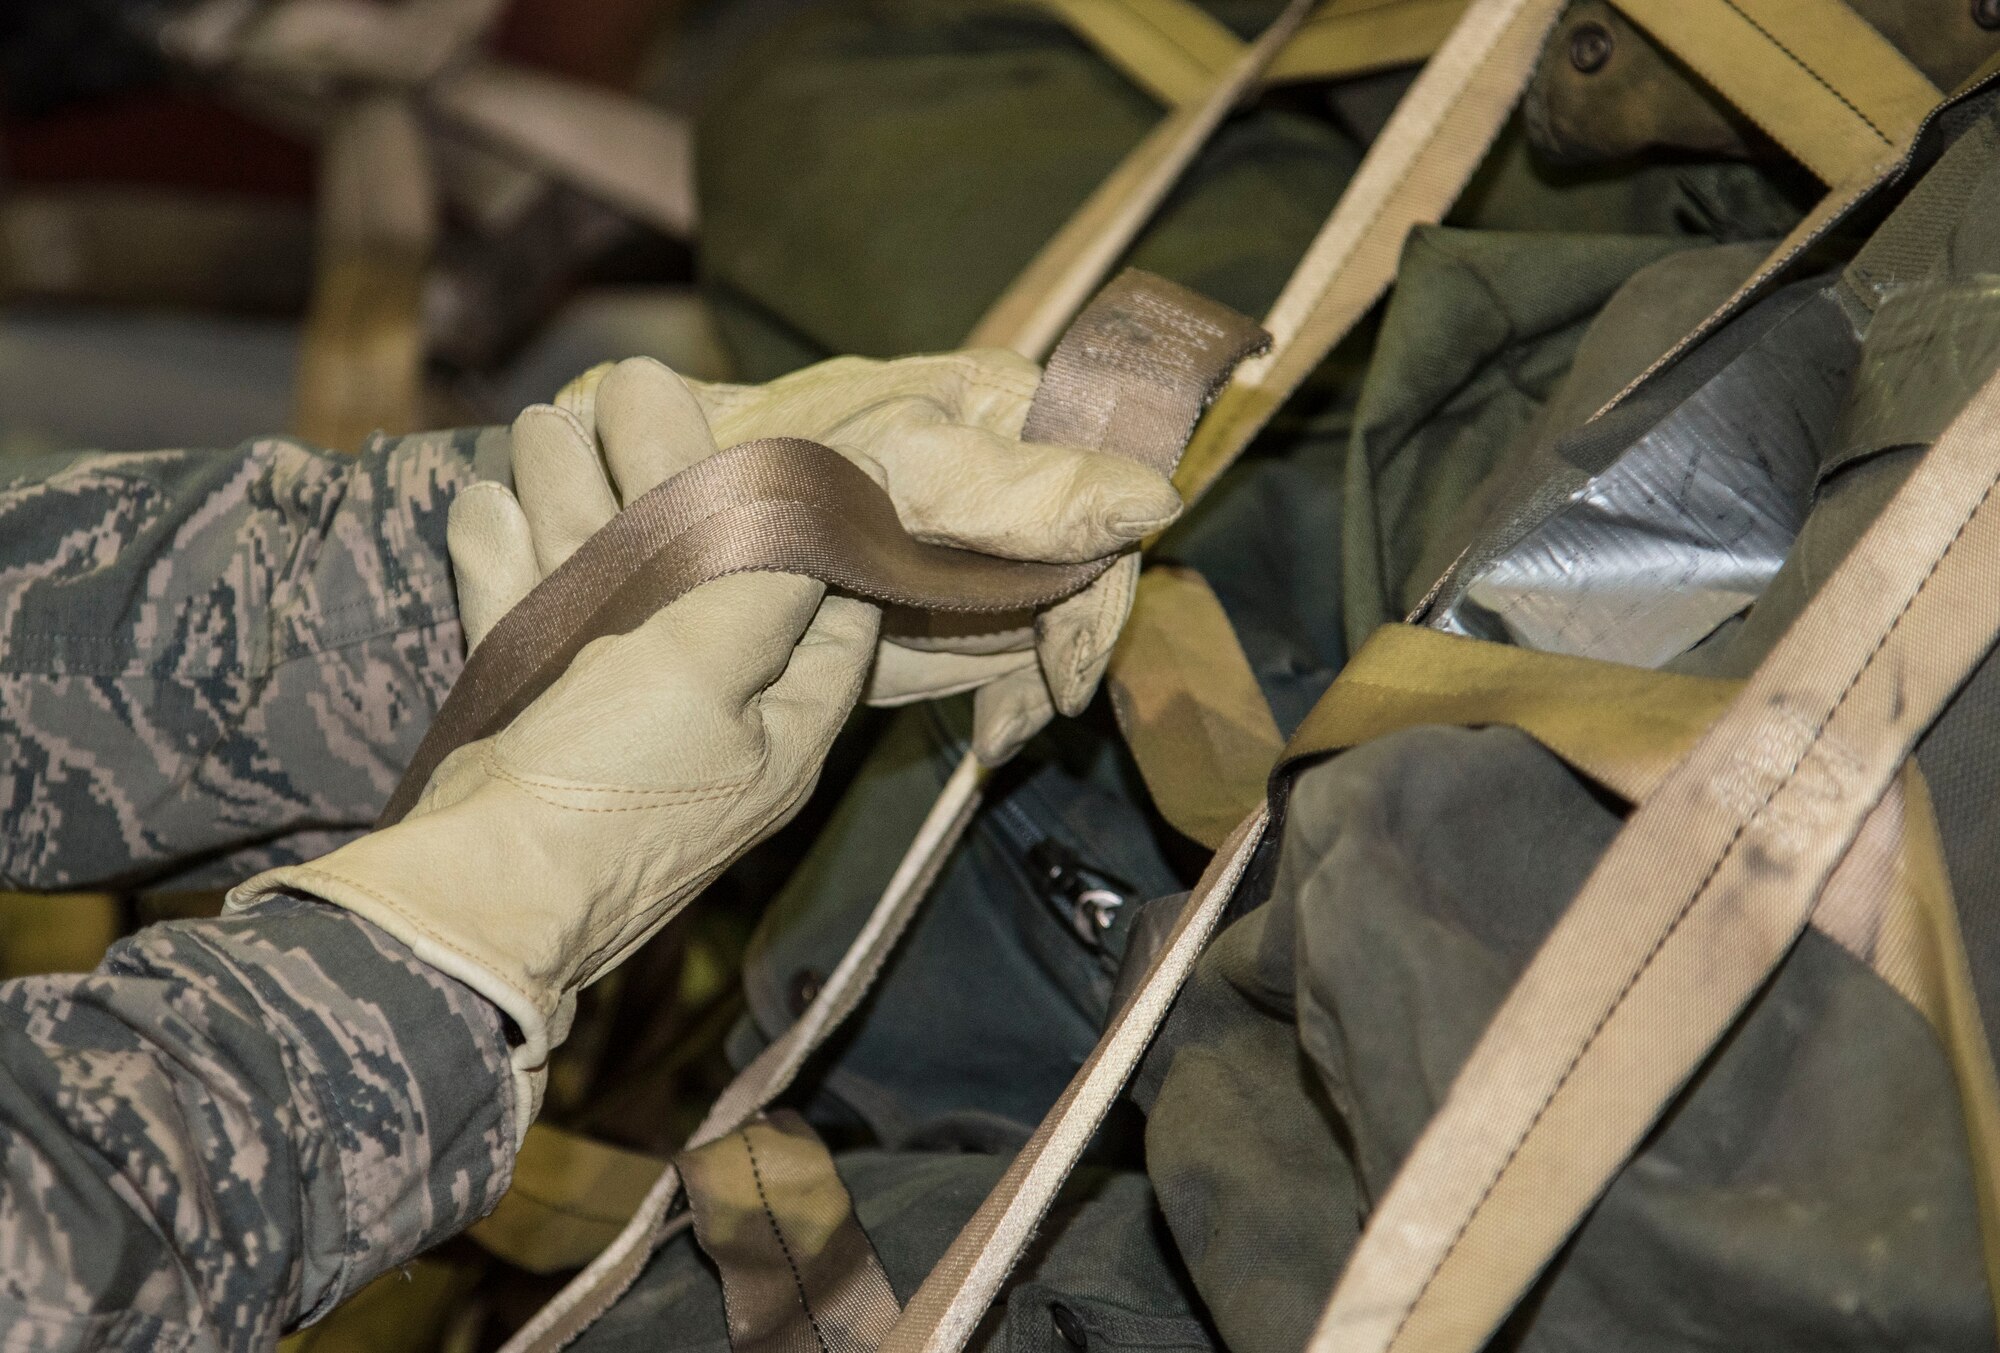 A 35th Logistics Readiness Squadron augmentee tightens straps on cargo at Misawa Air Base, Japan, March 15, 2016. These cargo deployment function personnel are responsible for building, labeling and loading cargo pallets. Pallets hold cargo in place during flights to ensure more stability and safety.  (U.S. Air Force photo by Airman 1st Class Jordyn Fetter)